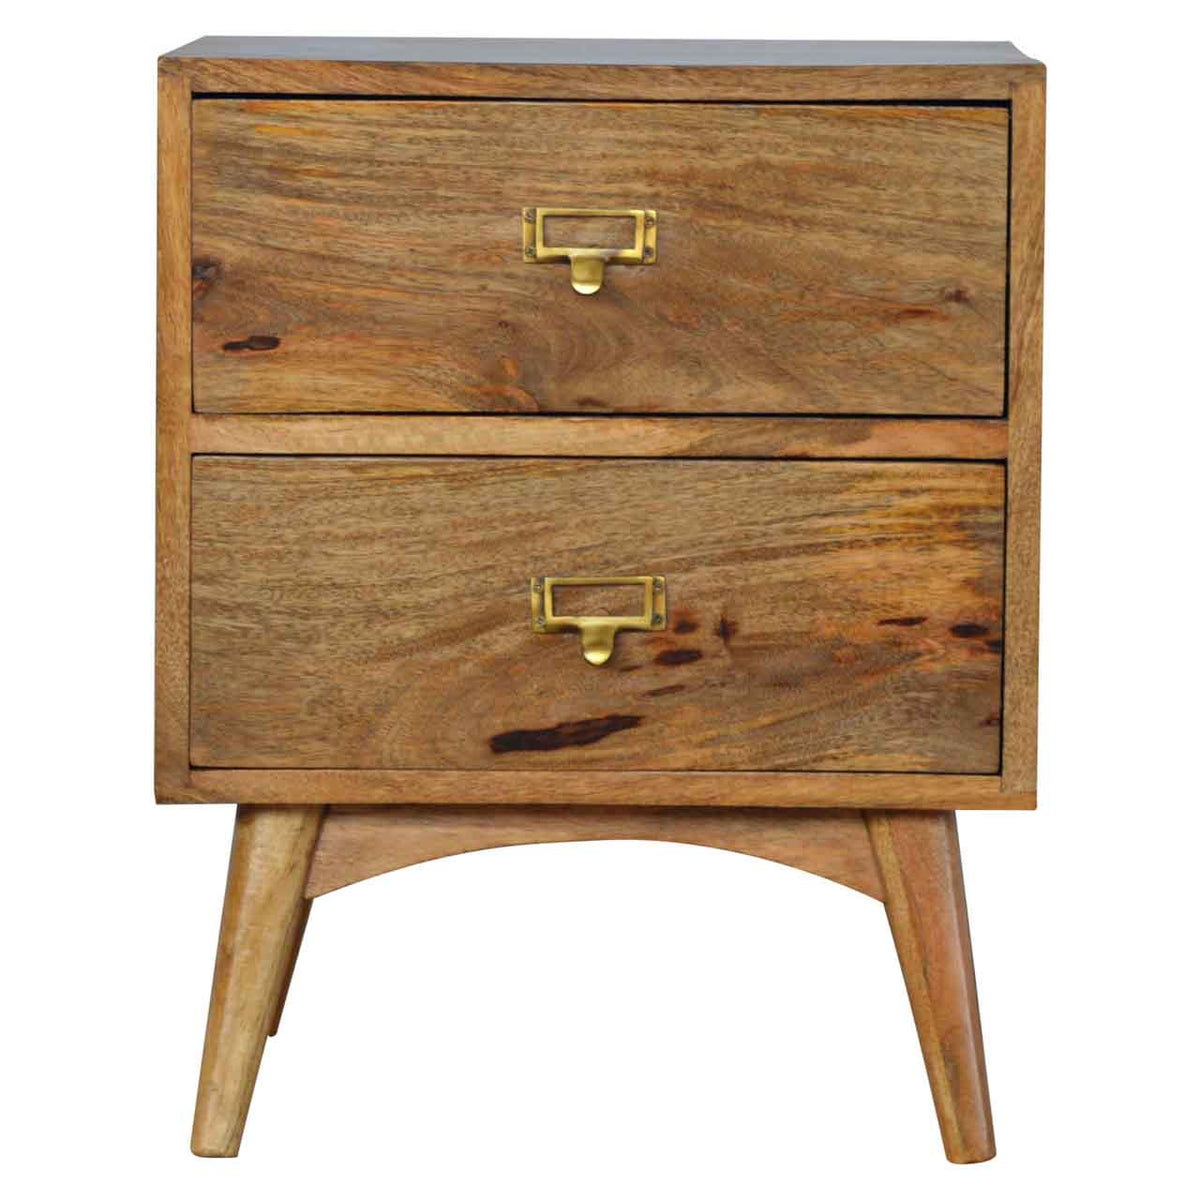 Mango wood bedside table with brass drawer knob handles for sale uk